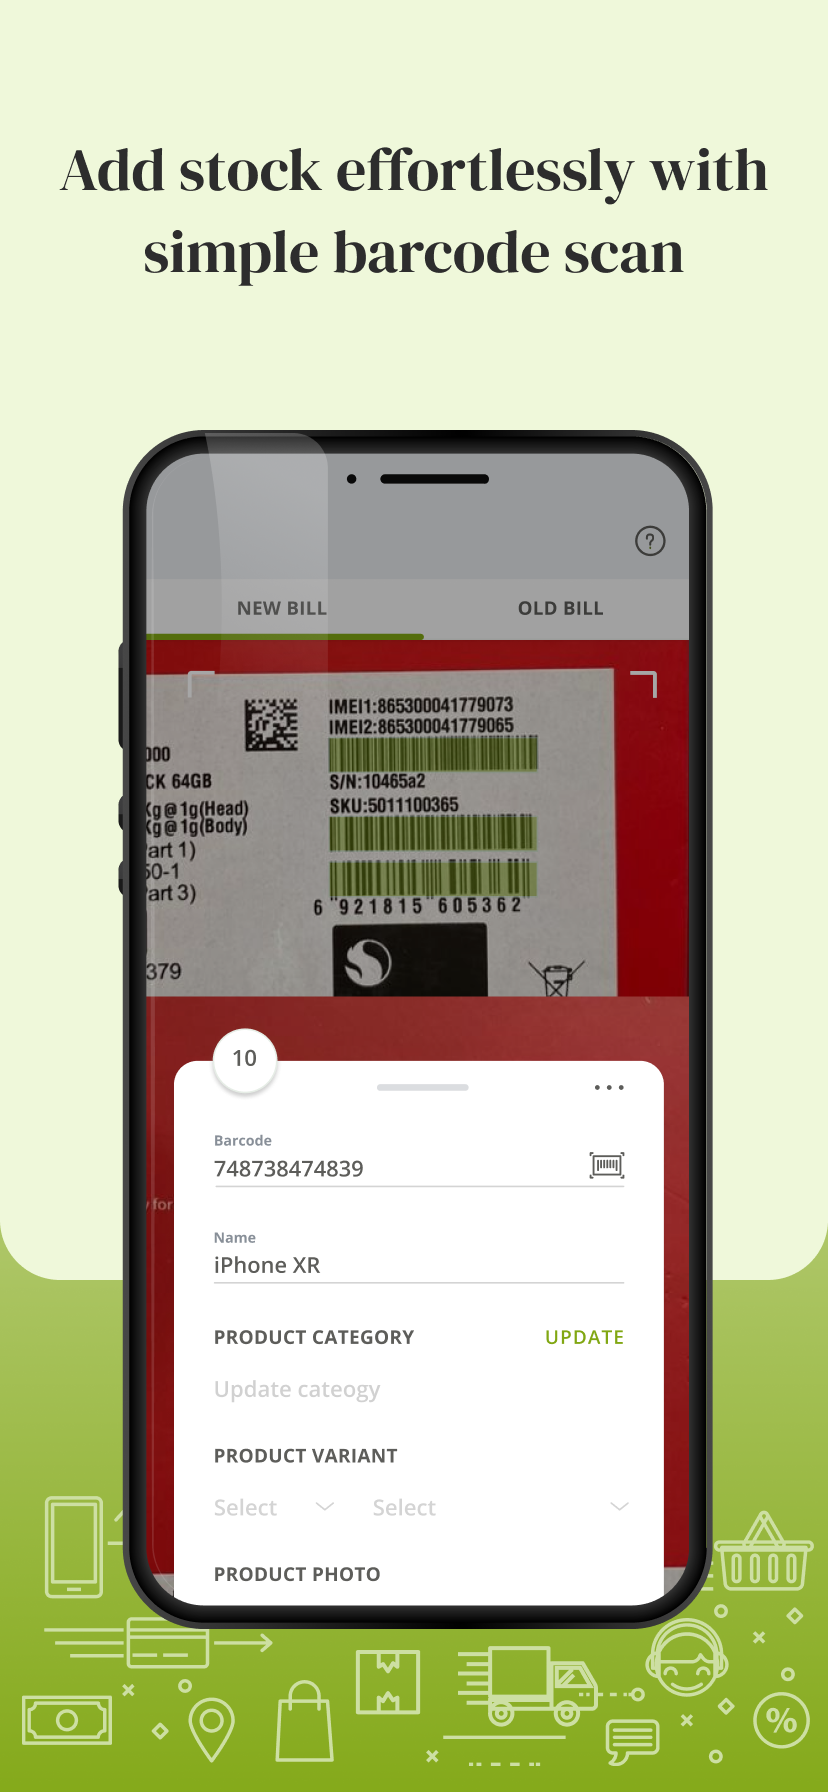 Use the barcode scan for adding products to the catalogue and also for easy billing and checkout.